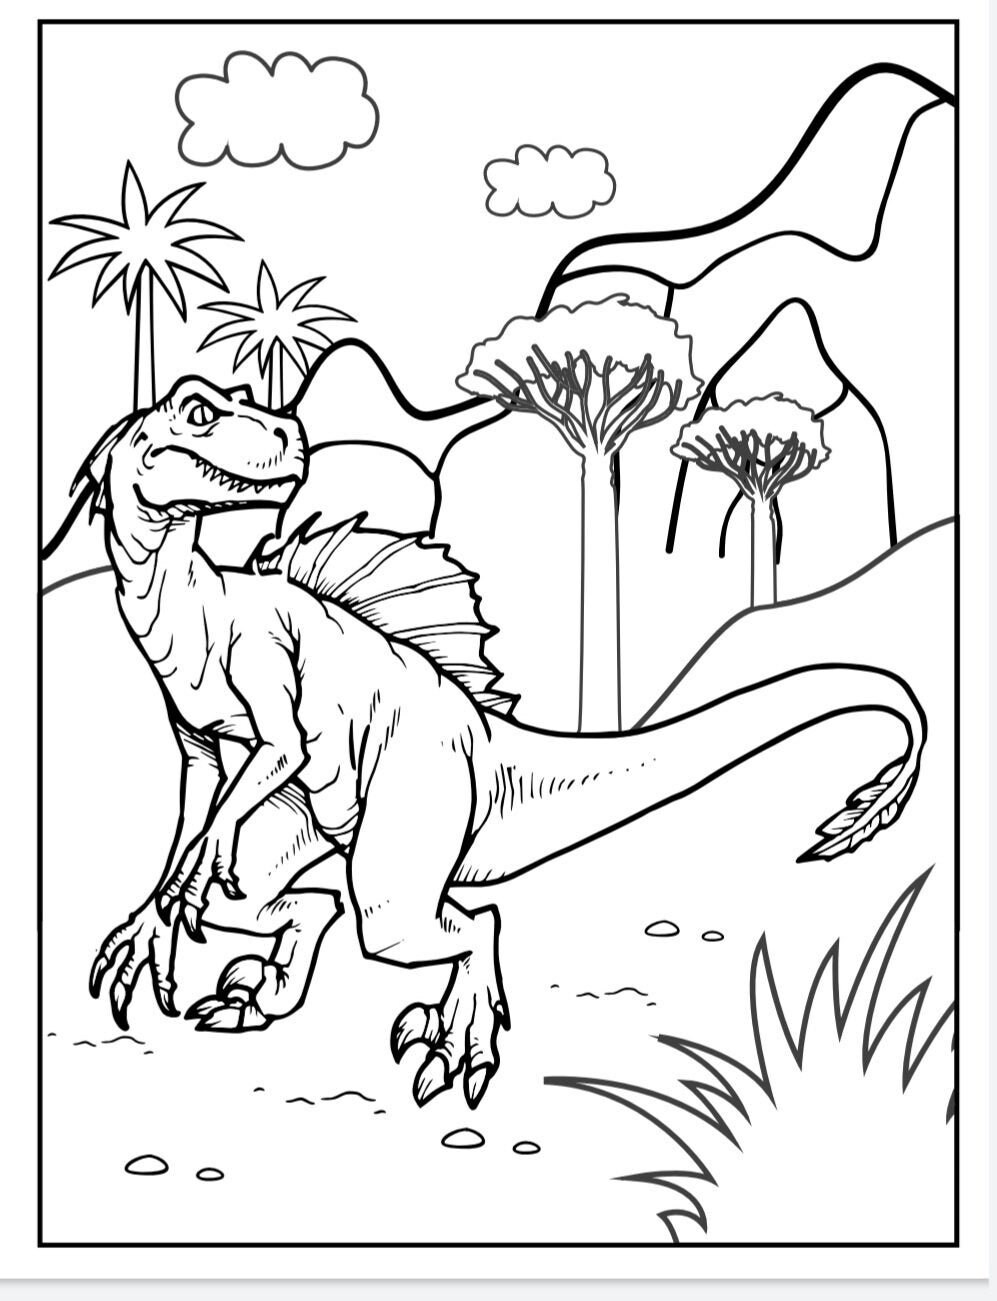 Dinosaur coloring book 40 pages | Etsy